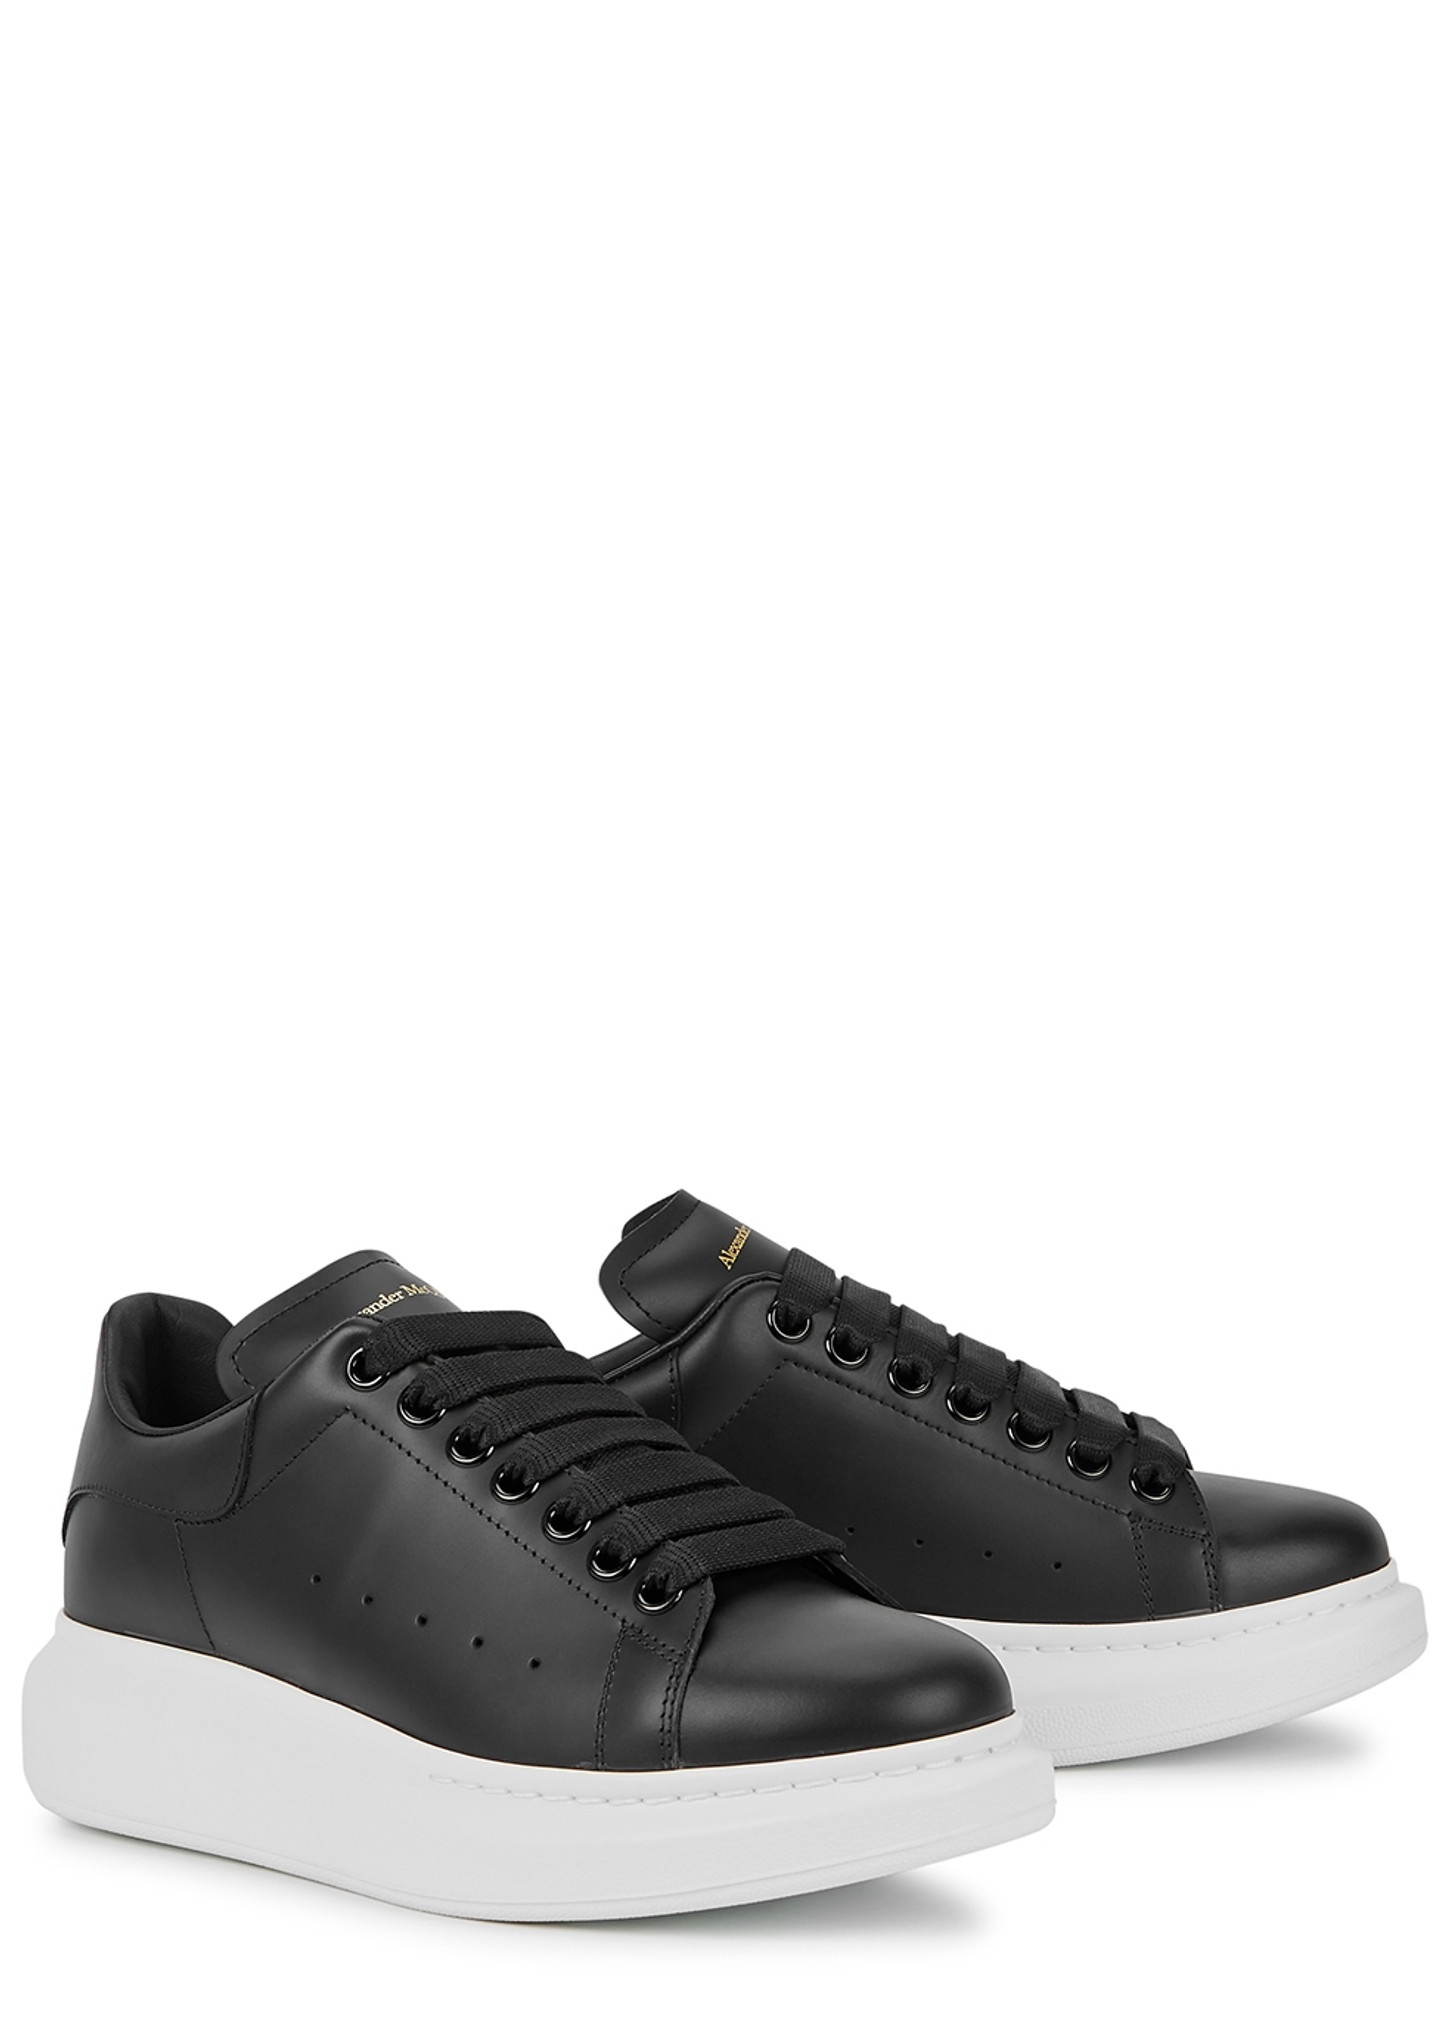 Oversized black leather sneakers - 2